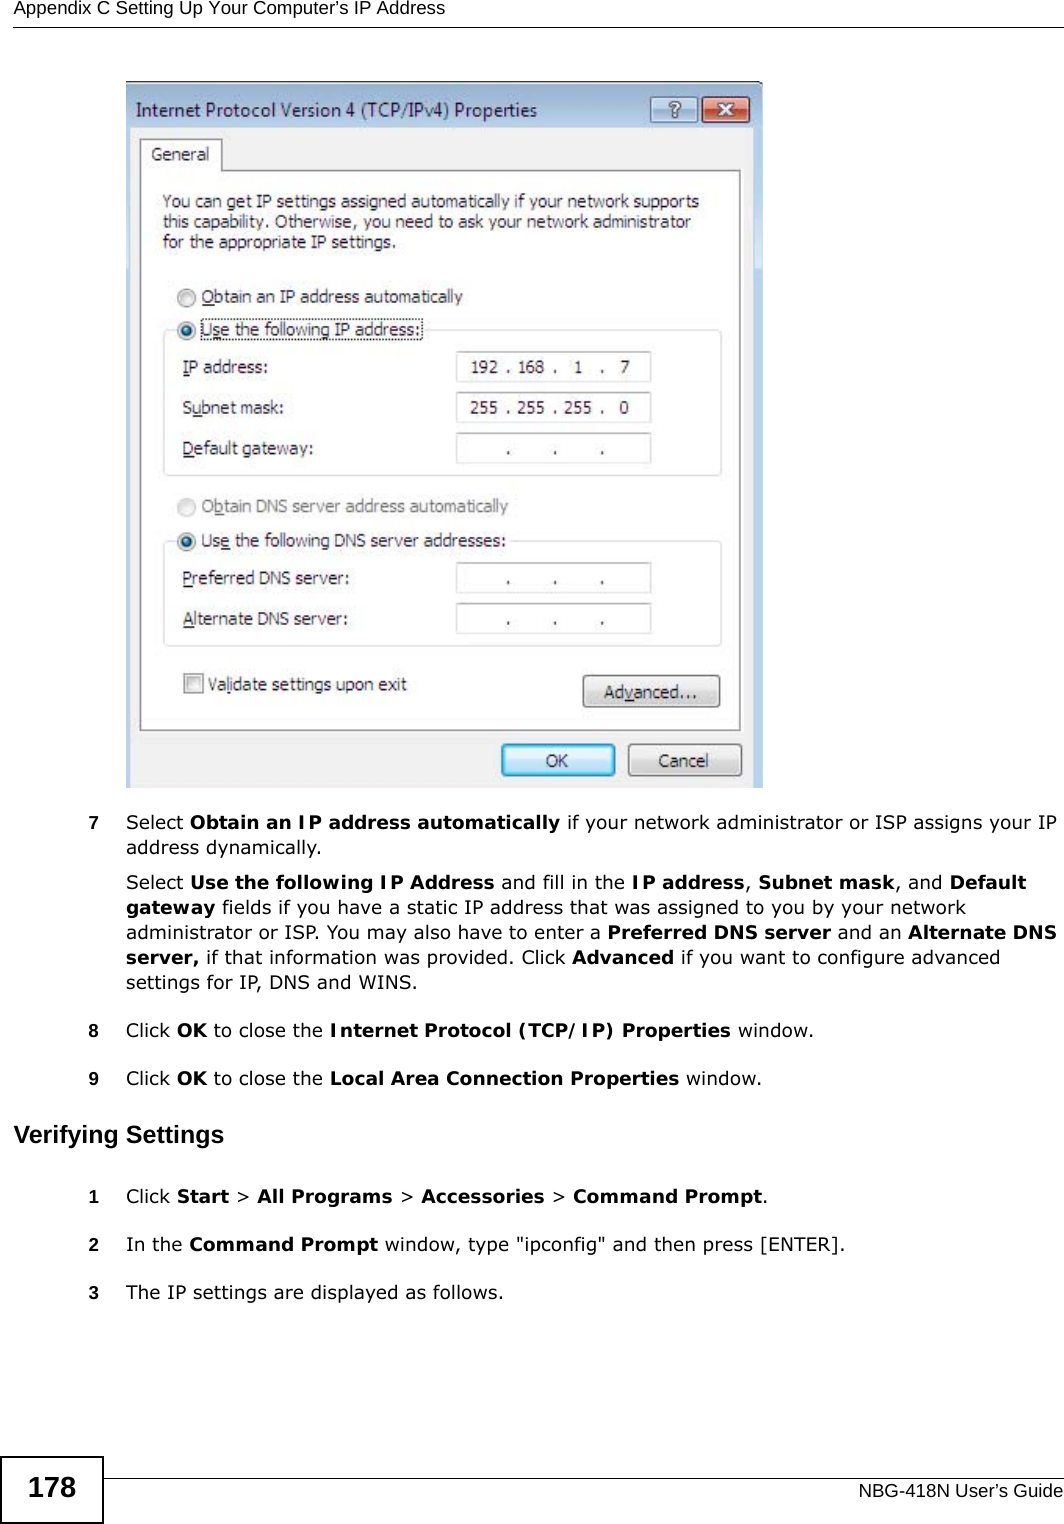 Appendix C Setting Up Your Computer’s IP AddressNBG-418N User’s Guide1787Select Obtain an IP address automatically if your network administrator or ISP assigns your IP address dynamically.Select Use the following IP Address and fill in the IP address, Subnet mask, and Default gateway fields if you have a static IP address that was assigned to you by your network administrator or ISP. You may also have to enter a Preferred DNS server and an Alternate DNS server, if that information was provided. Click Advanced if you want to configure advanced settings for IP, DNS and WINS. 8Click OK to close the Internet Protocol (TCP/IP) Properties window.9Click OK to close the Local Area Connection Properties window.Verifying Settings1Click Start &gt; All Programs &gt; Accessories &gt; Command Prompt.2In the Command Prompt window, type &quot;ipconfig&quot; and then press [ENTER]. 3The IP settings are displayed as follows.